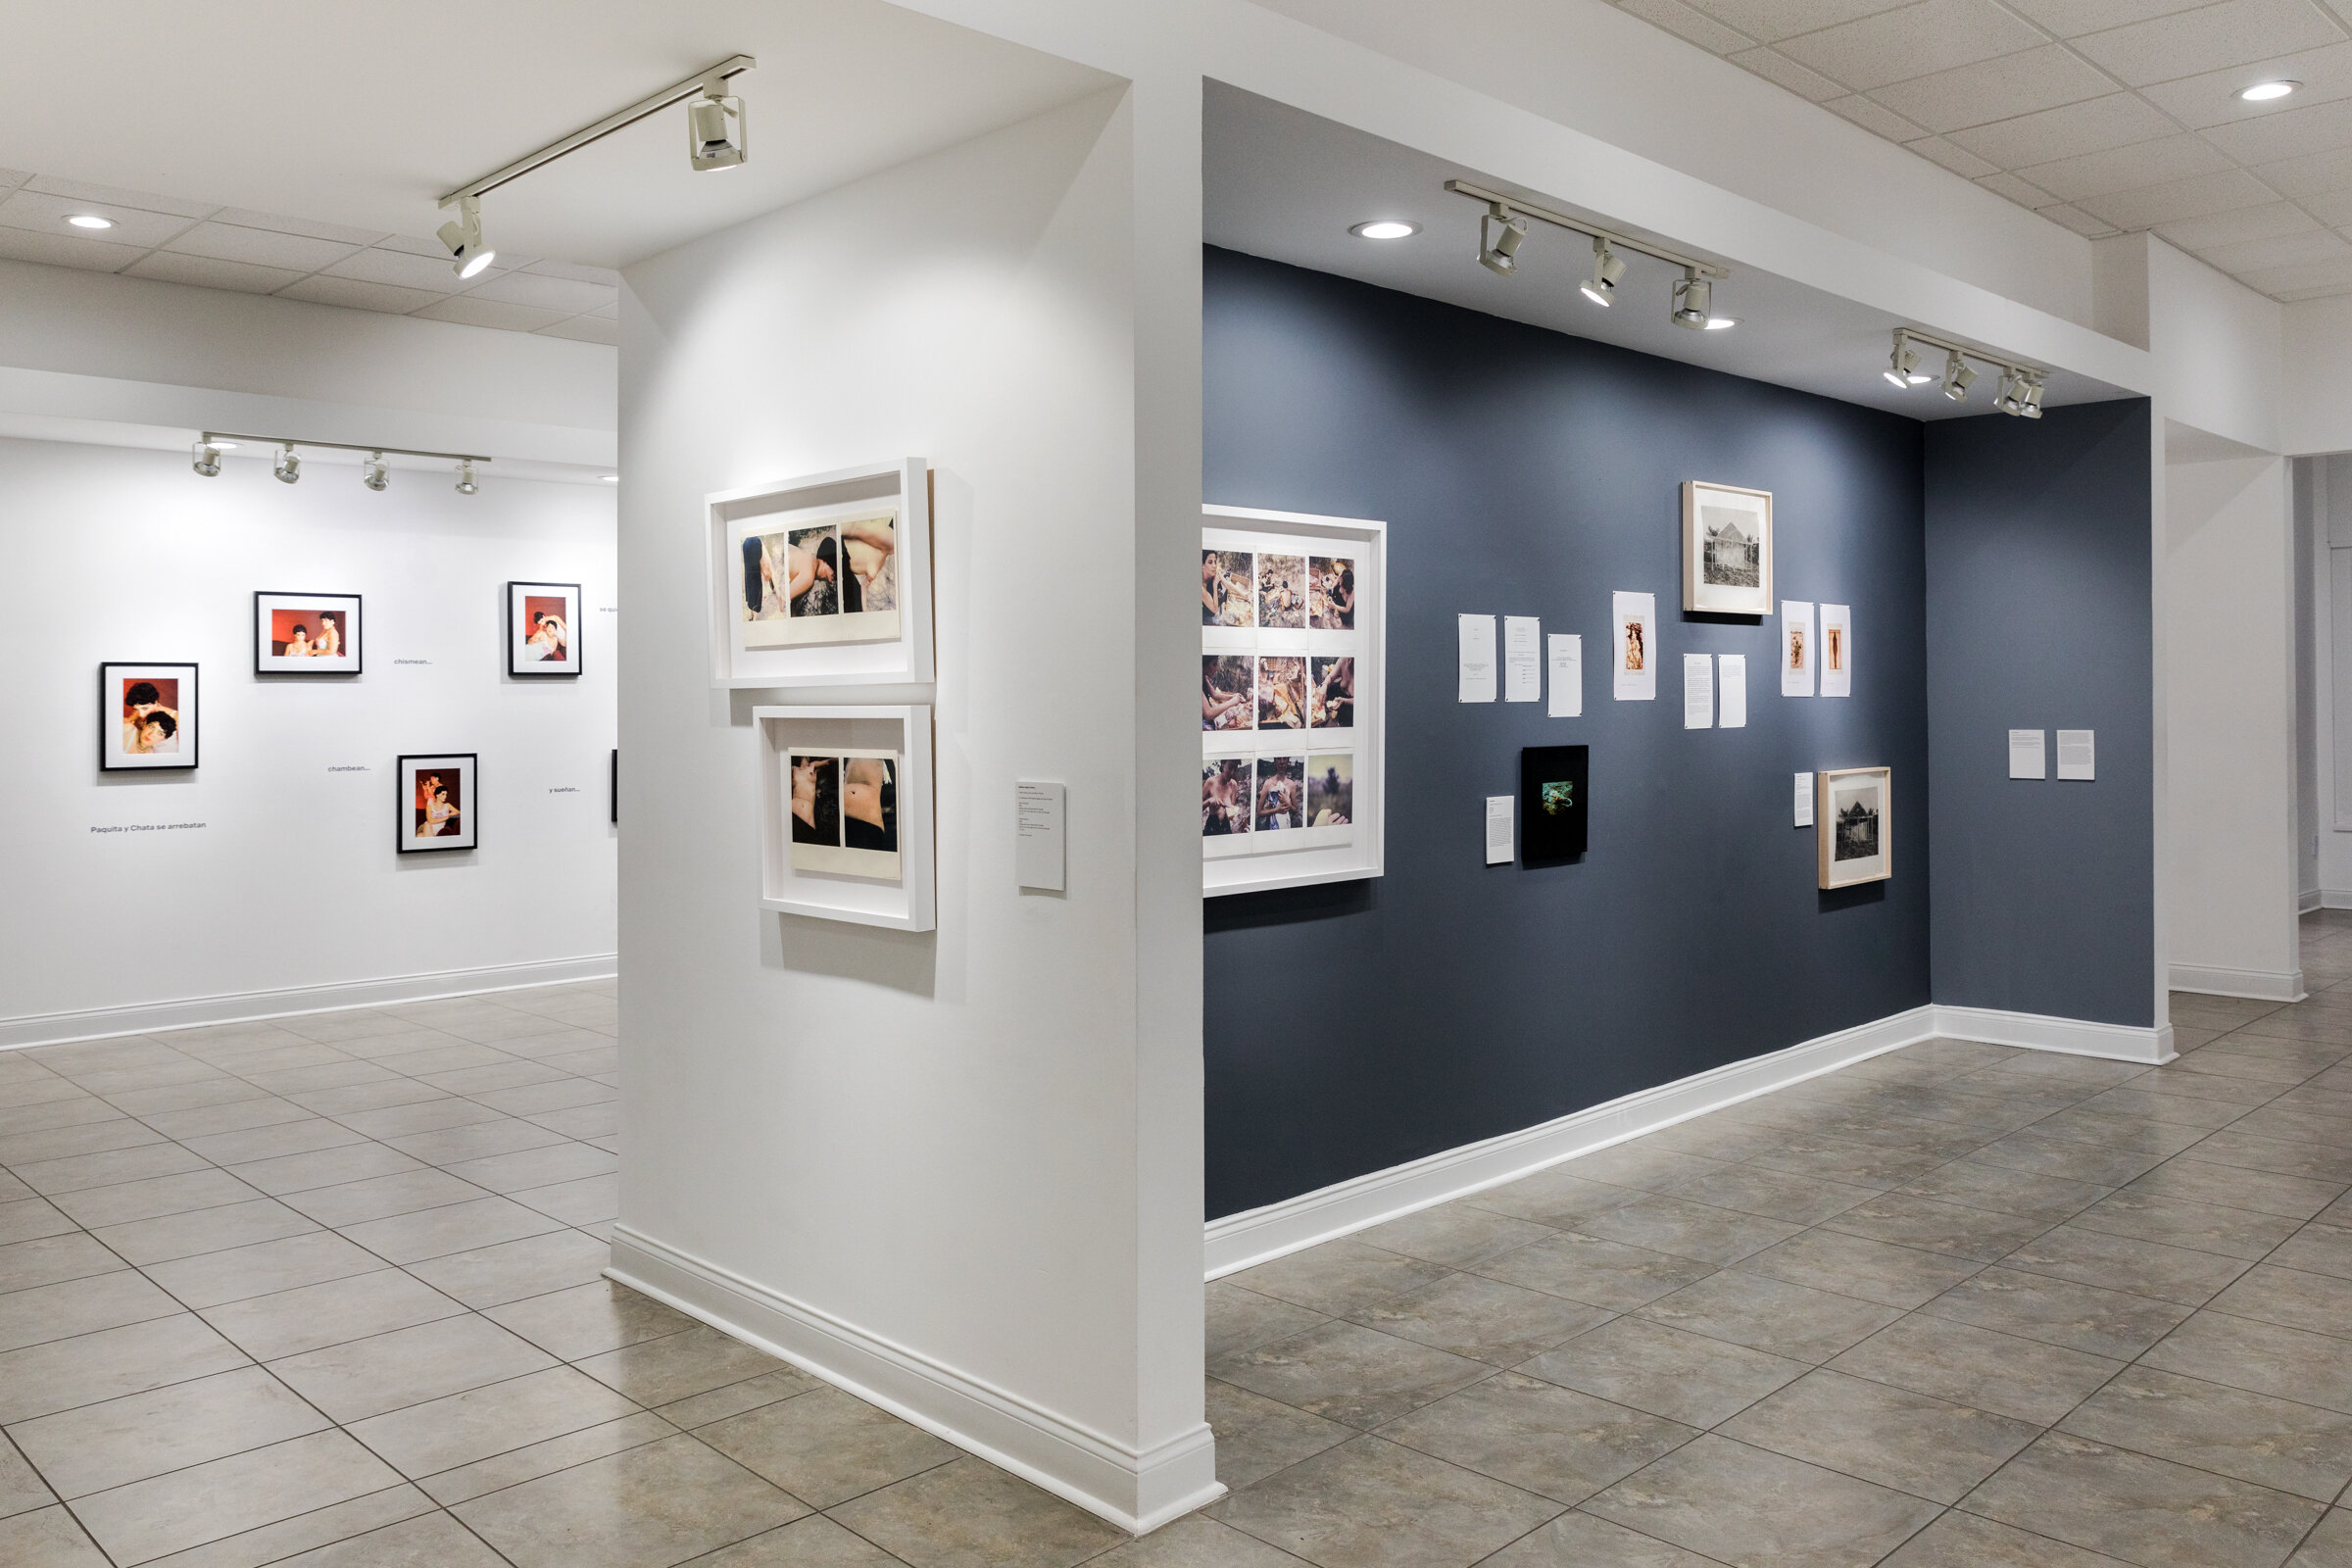  Building a Feminist Archive: Cuban Women Photographers in the US. Bailey Contemporary Arts (BaCA). 2019. Photo by Diana Larrea. 